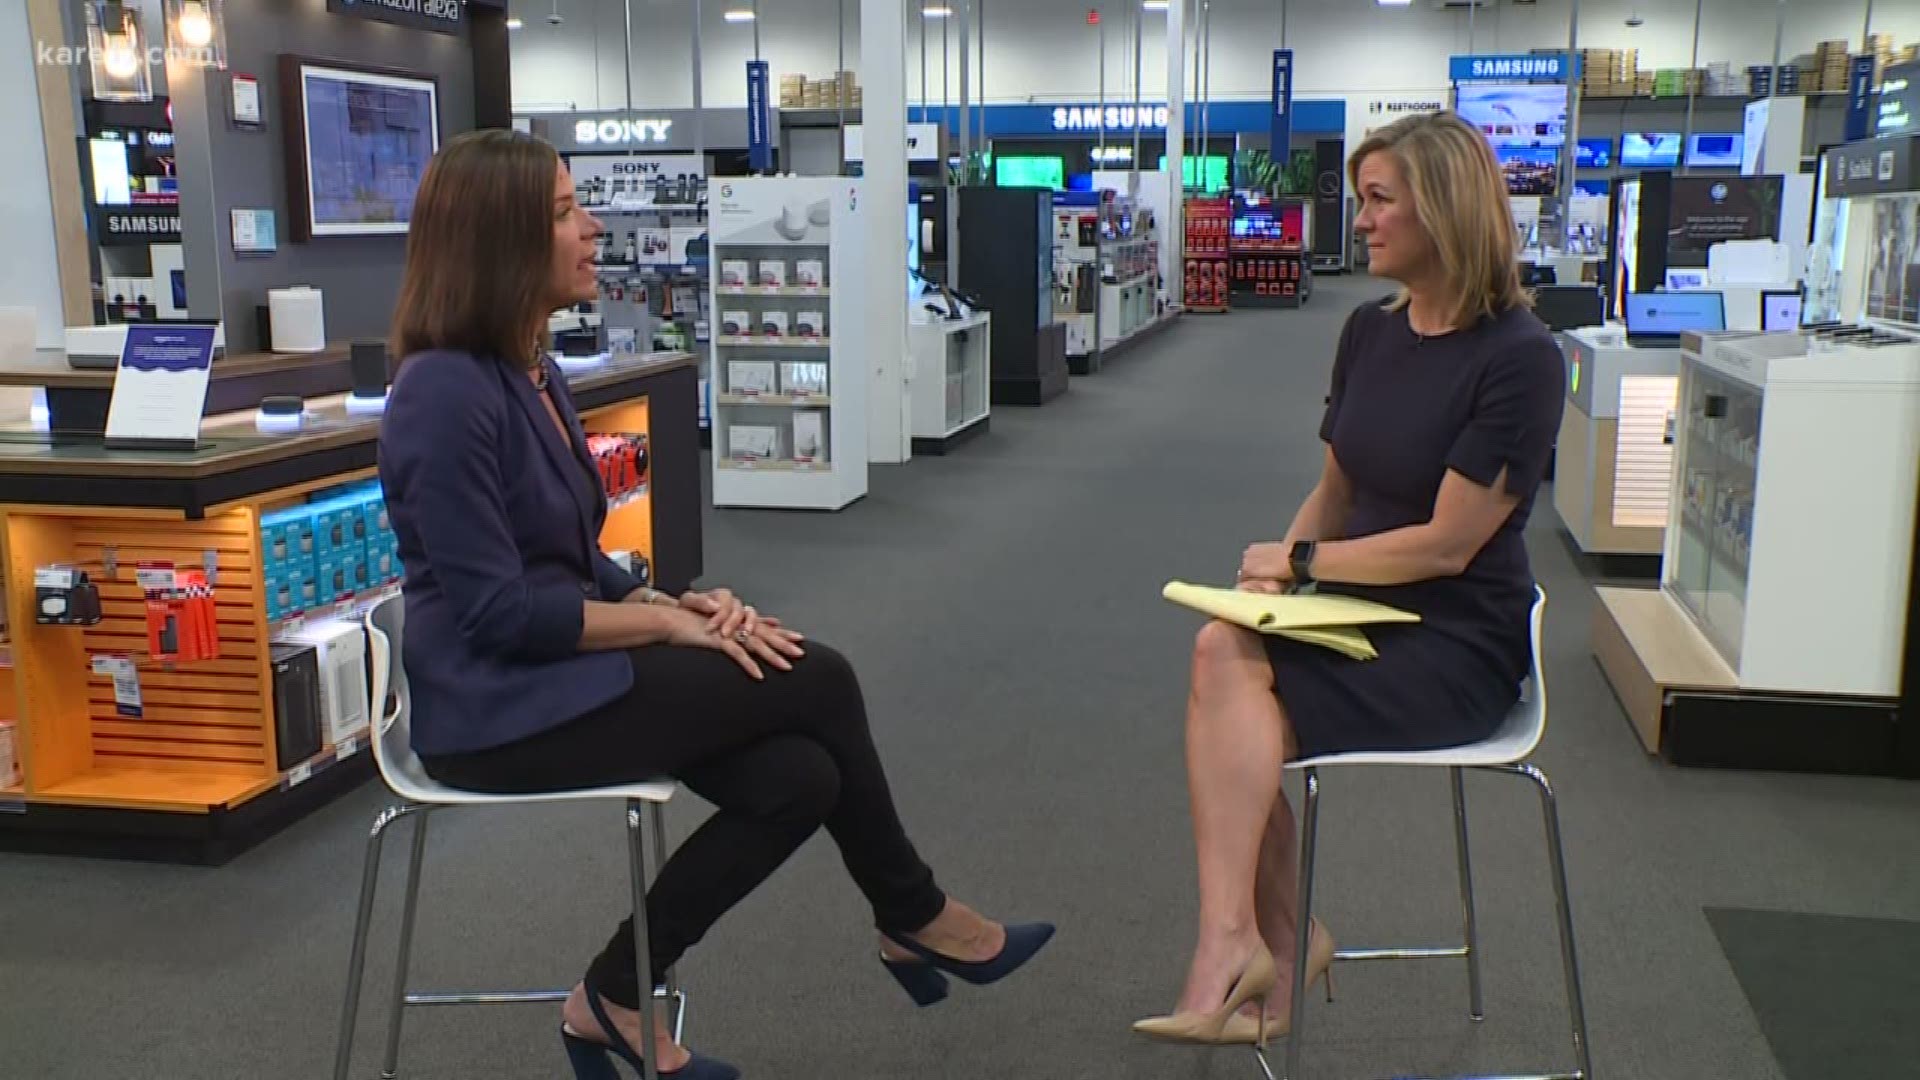 As CEO Barry says she will make investing in Best Buy’s 123,000 employees one of her top priorities.